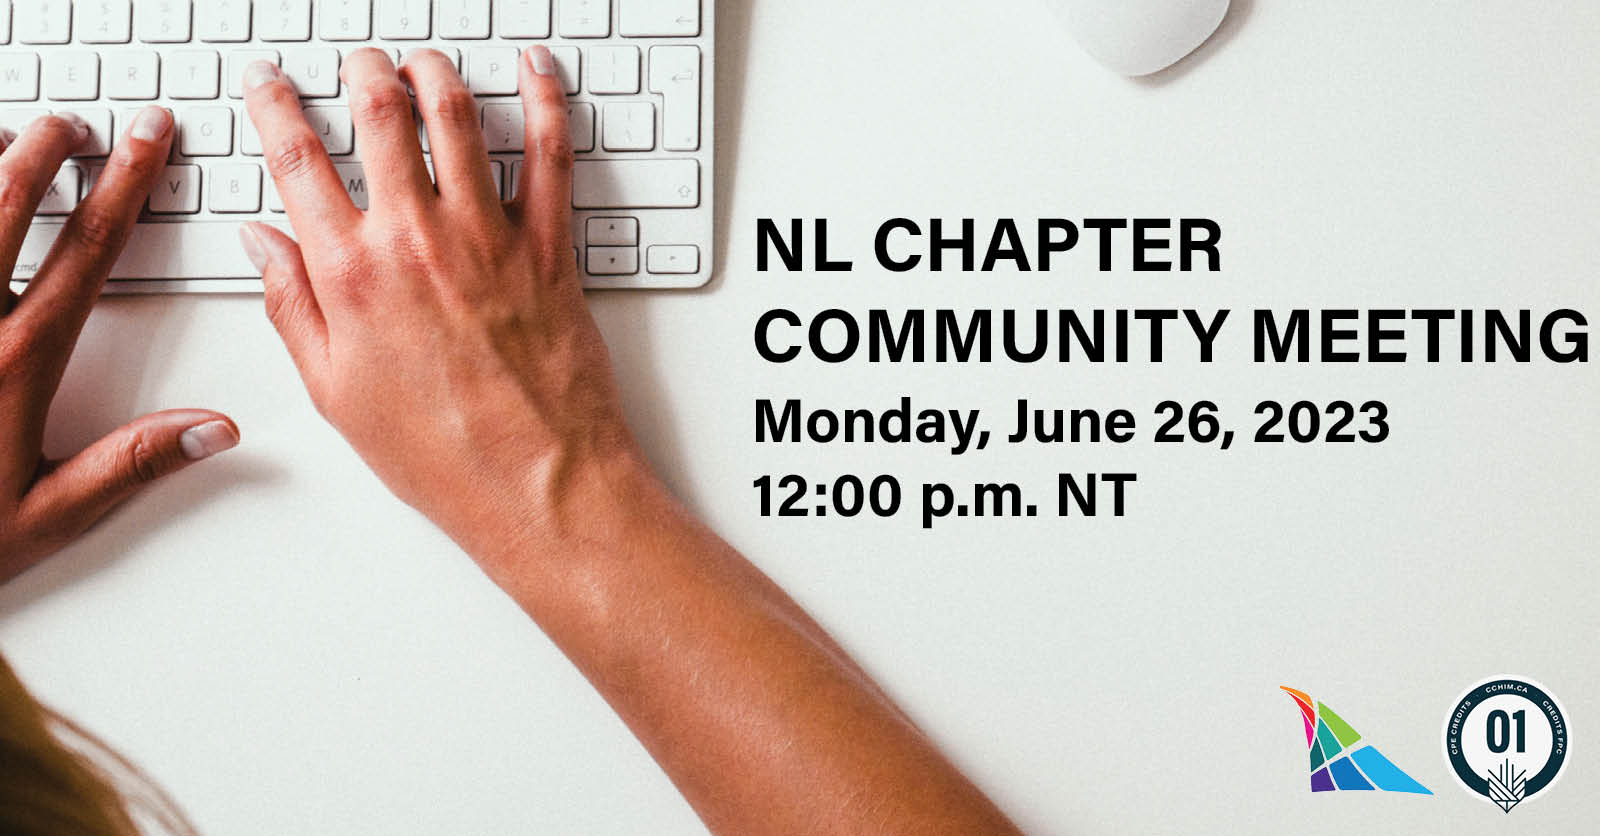 NL chapter community meeting